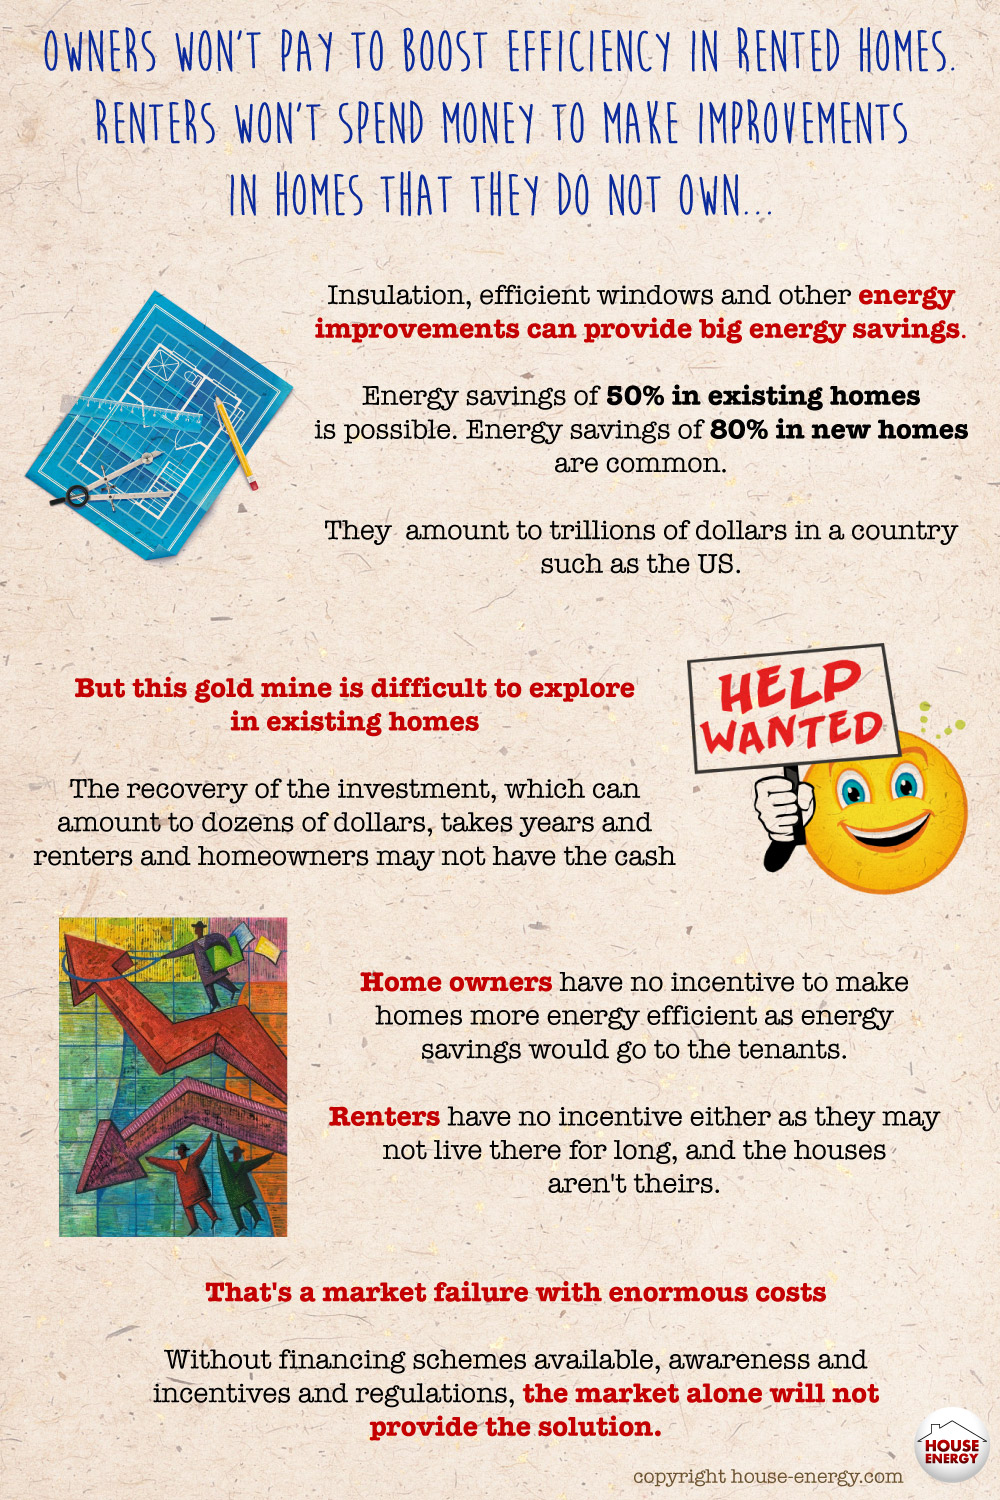 Homeowners vs. renters and energy improvements